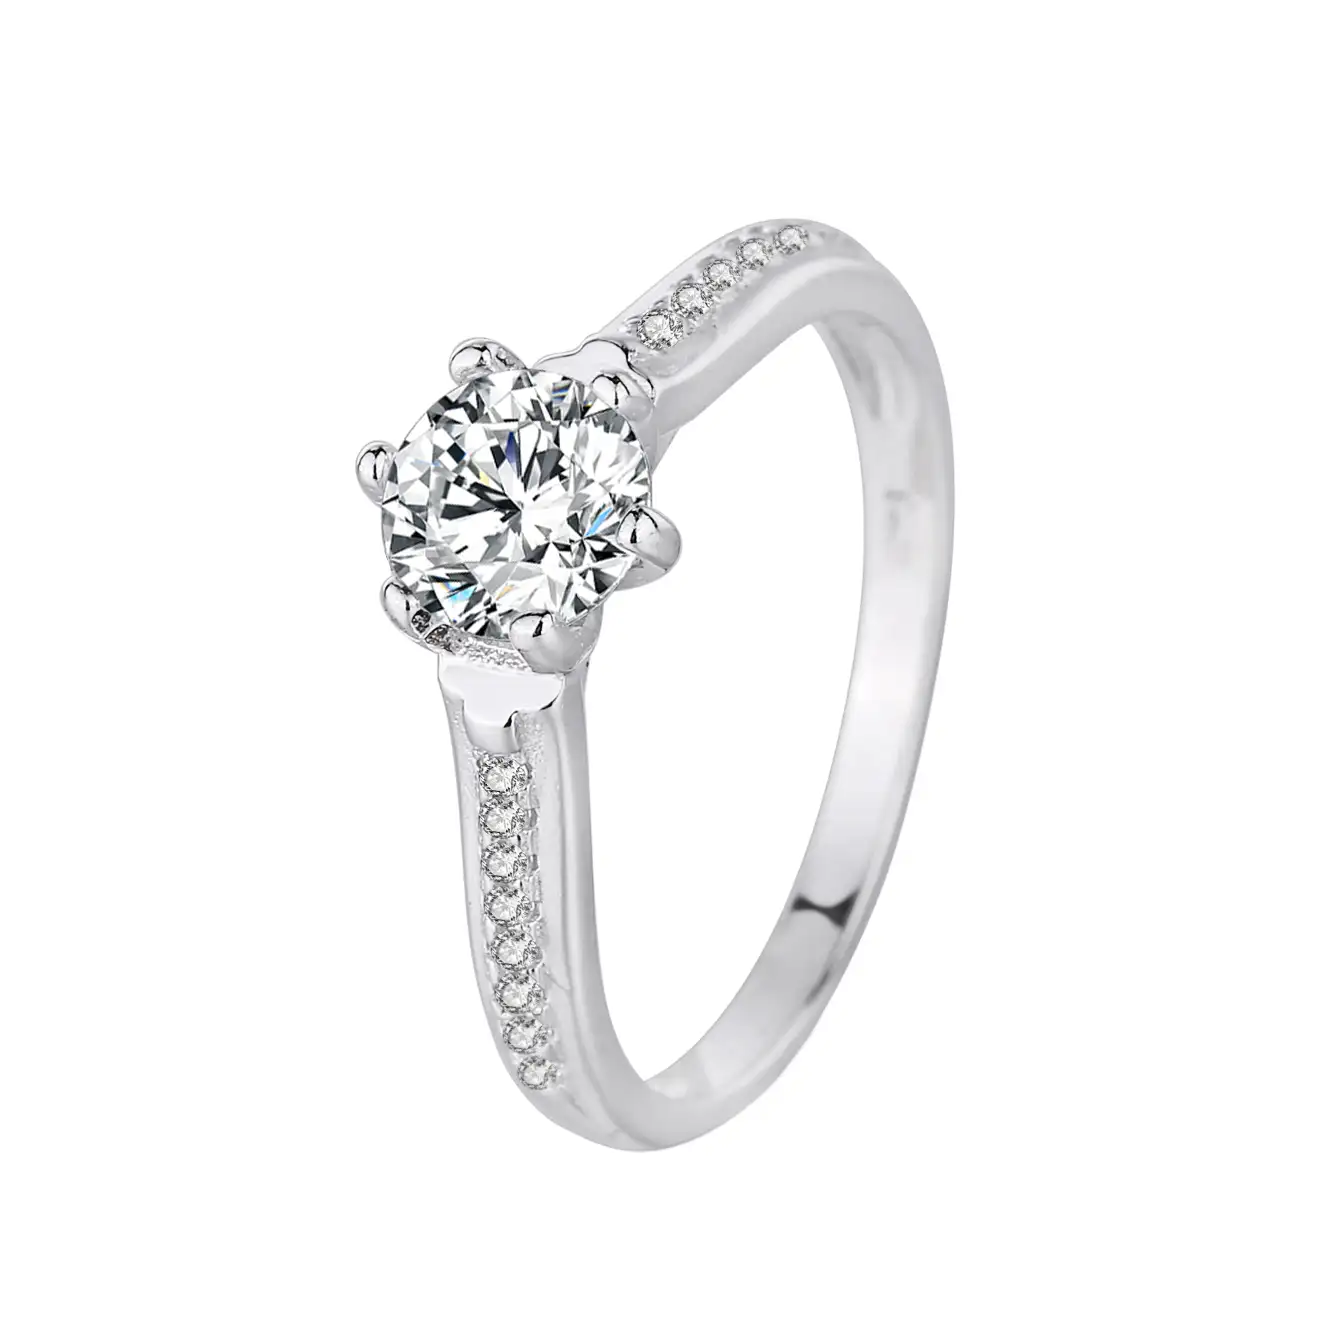 Silver Cubic Zirconia Solitaire Ring 70200041